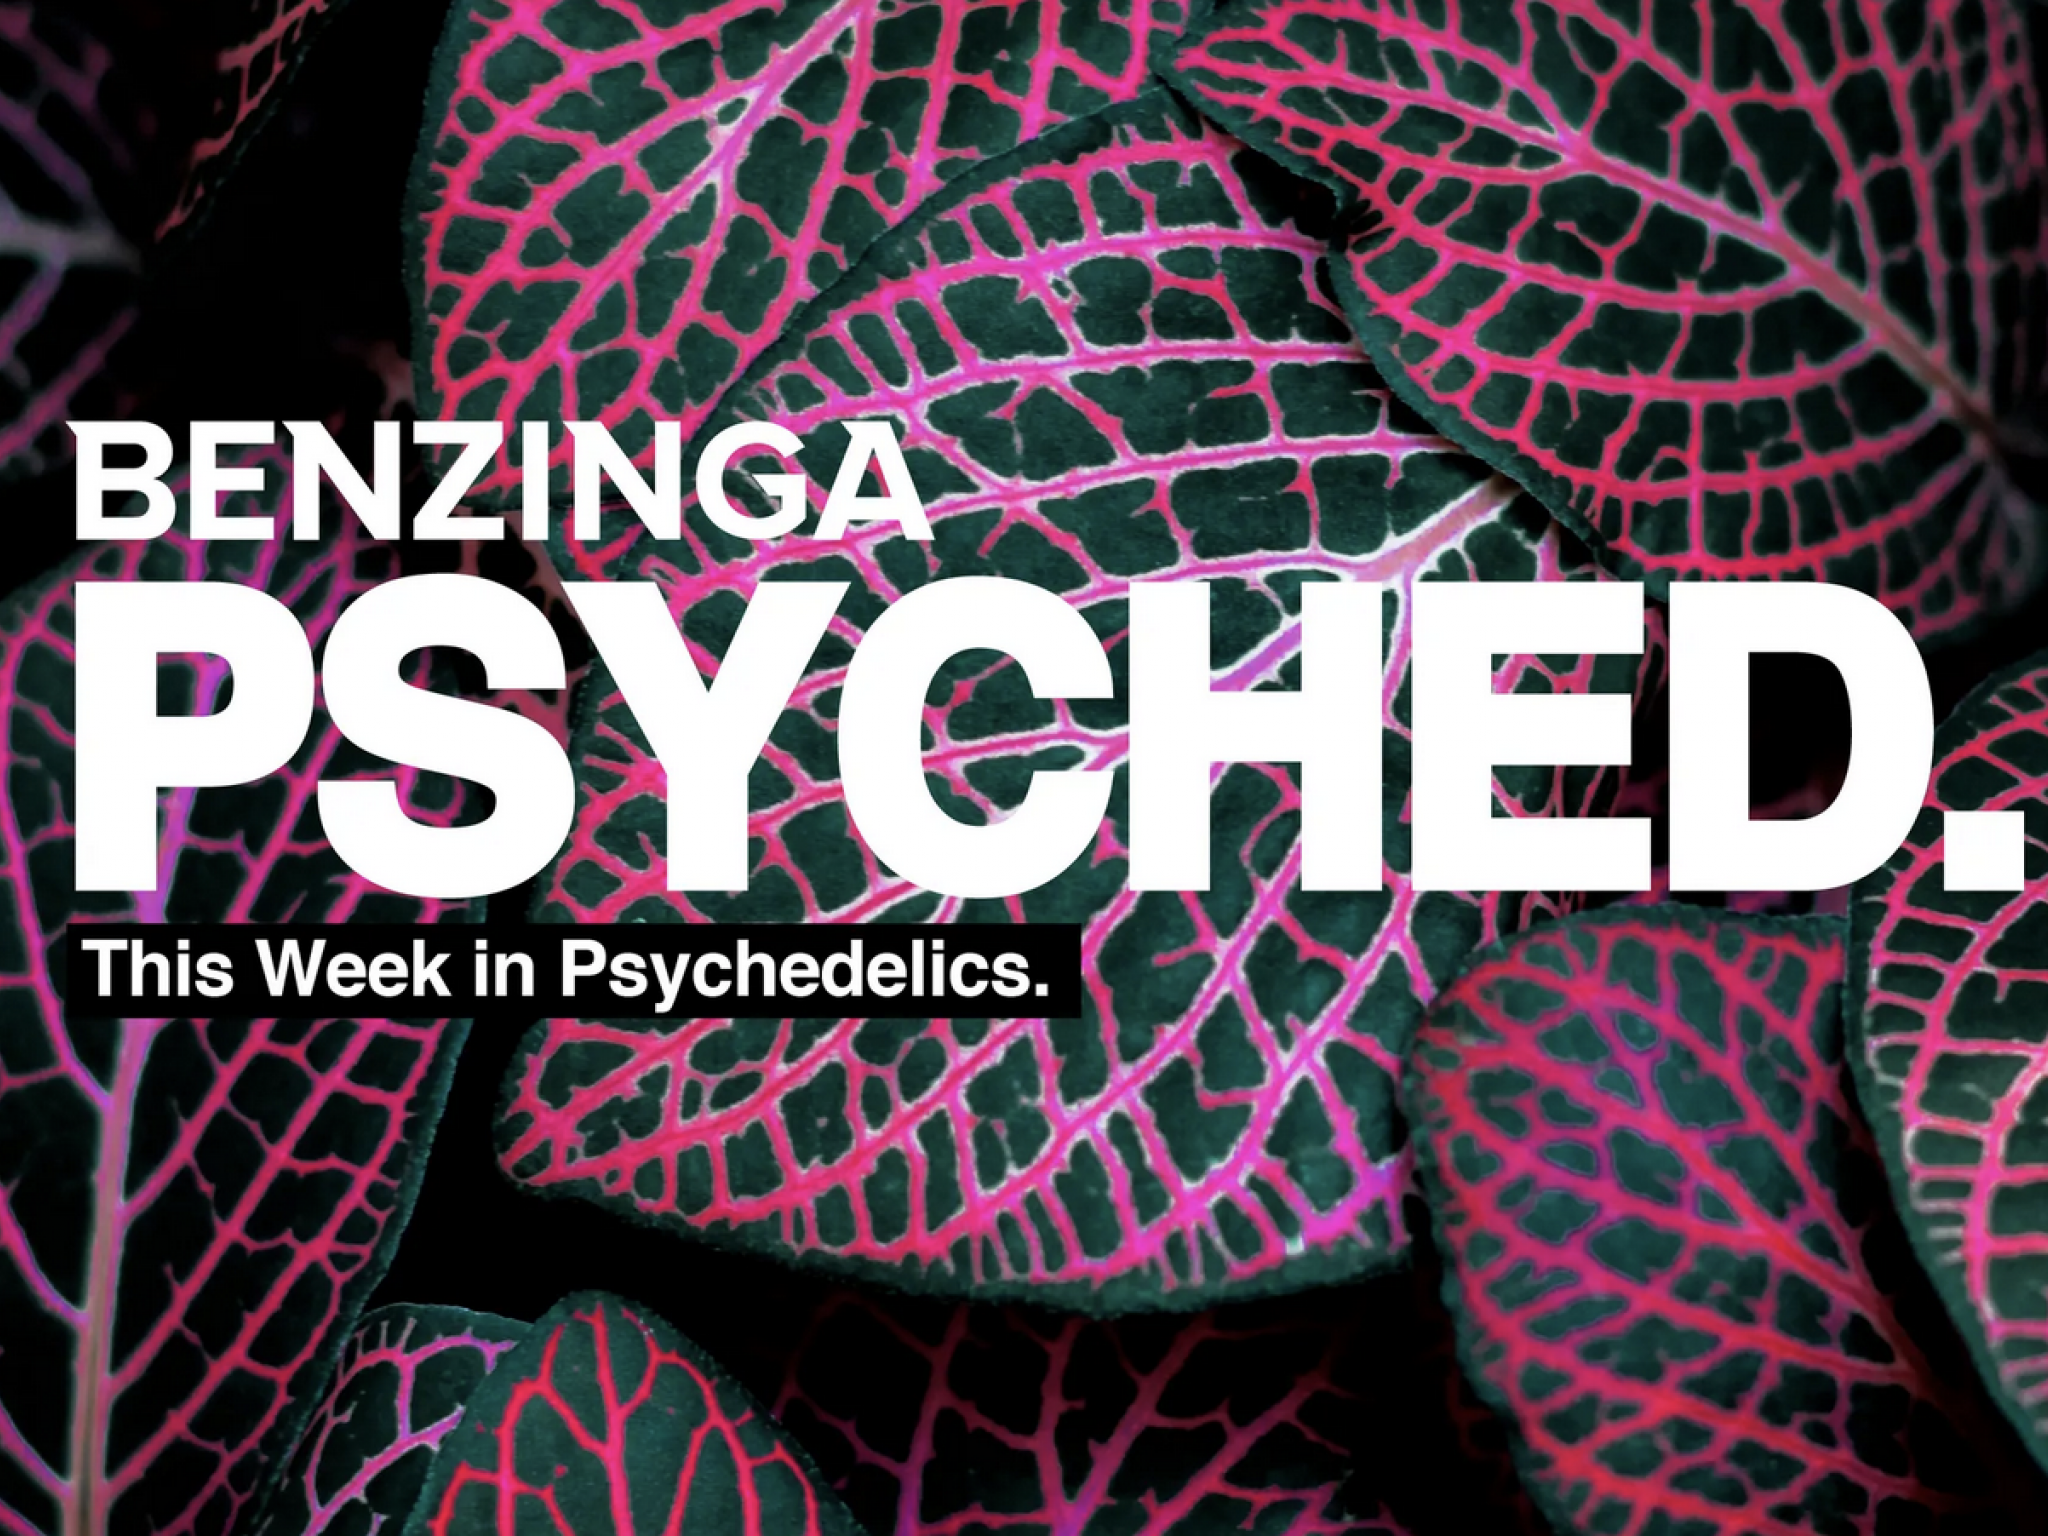  psyched-ny-discusses-regulations-mdma-for-ptsd-aims-for-legalization-shrooms-for-eating-disorders--more 